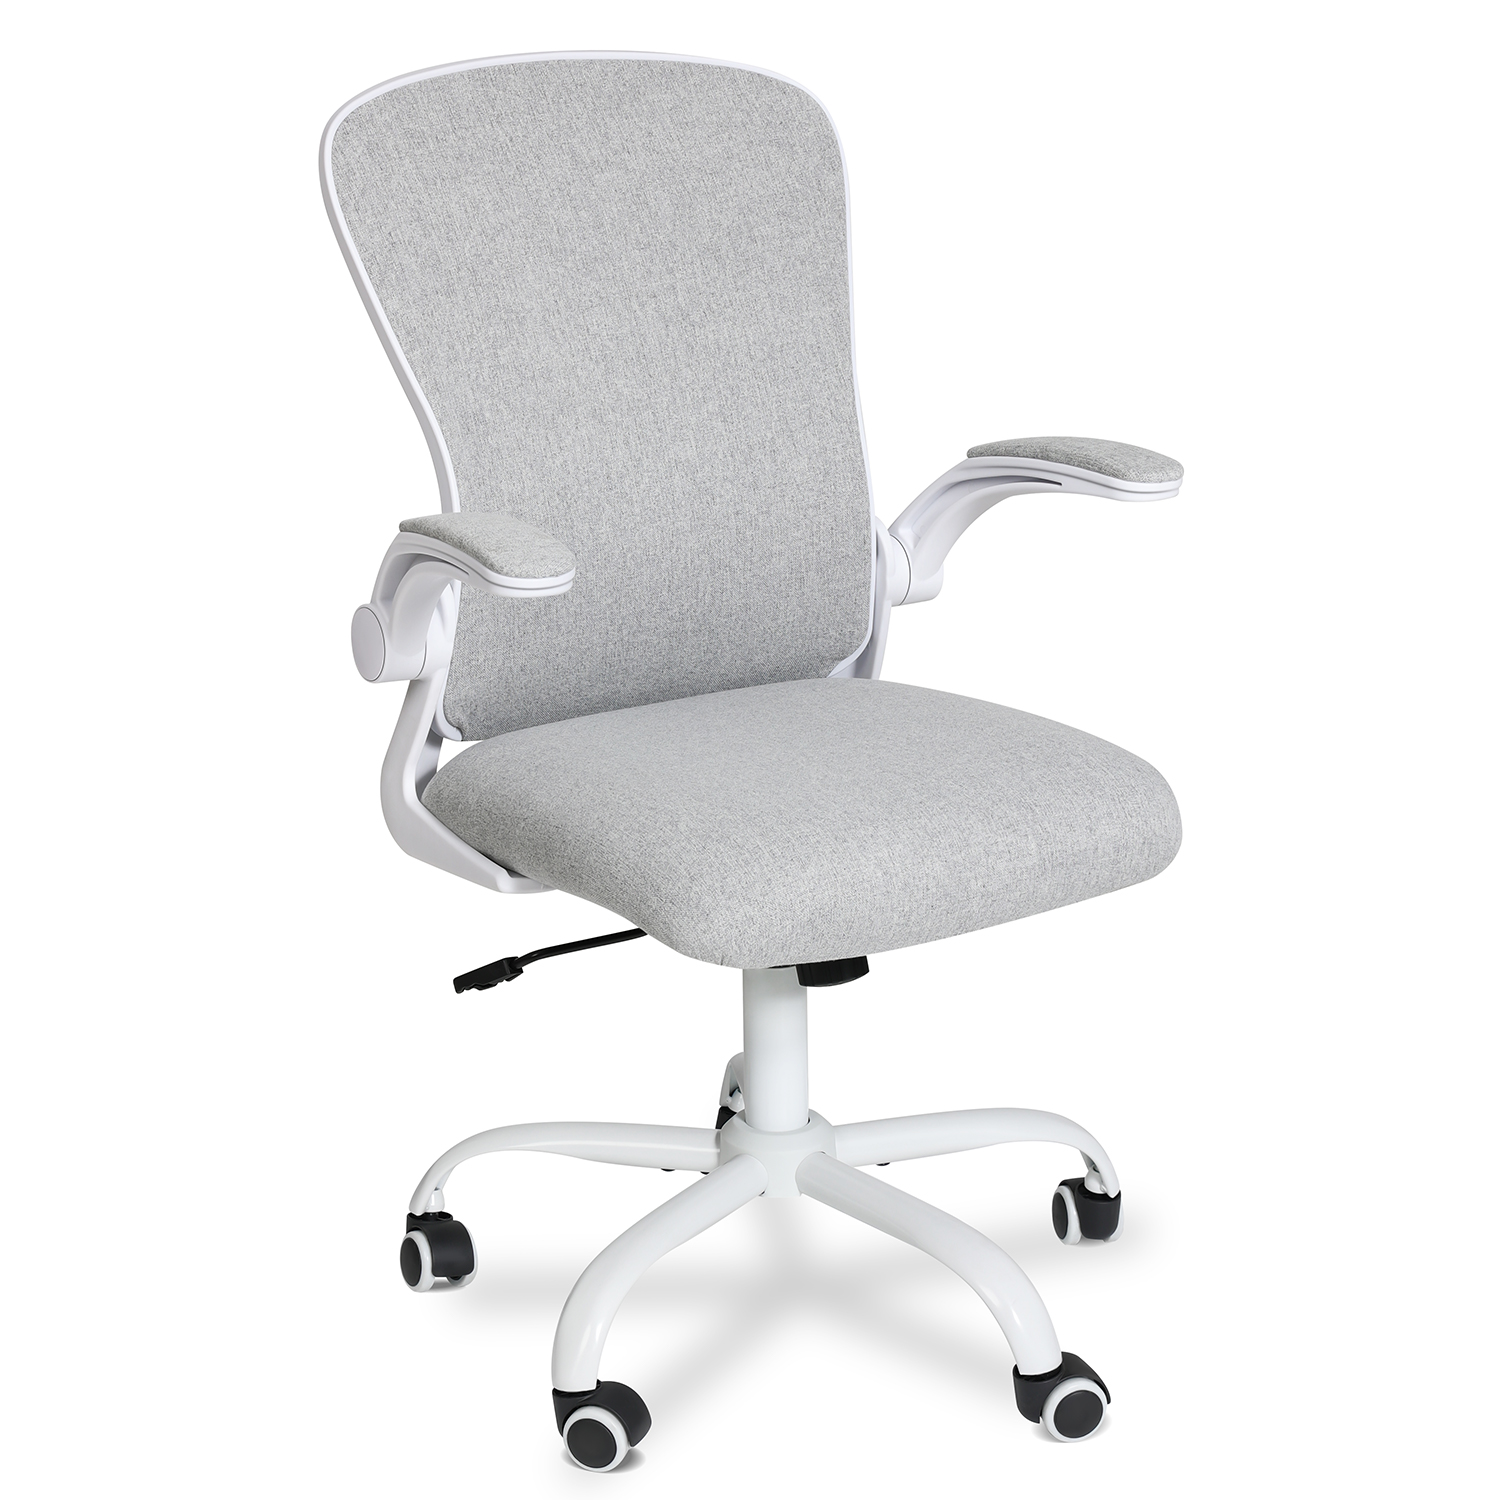 UK-OC077 Flip-up Armrest Ergonomic Desk Chair Computer Task Chair Mesh with Armrests lumbar support Mid-Back for Home Office Conference Study Room